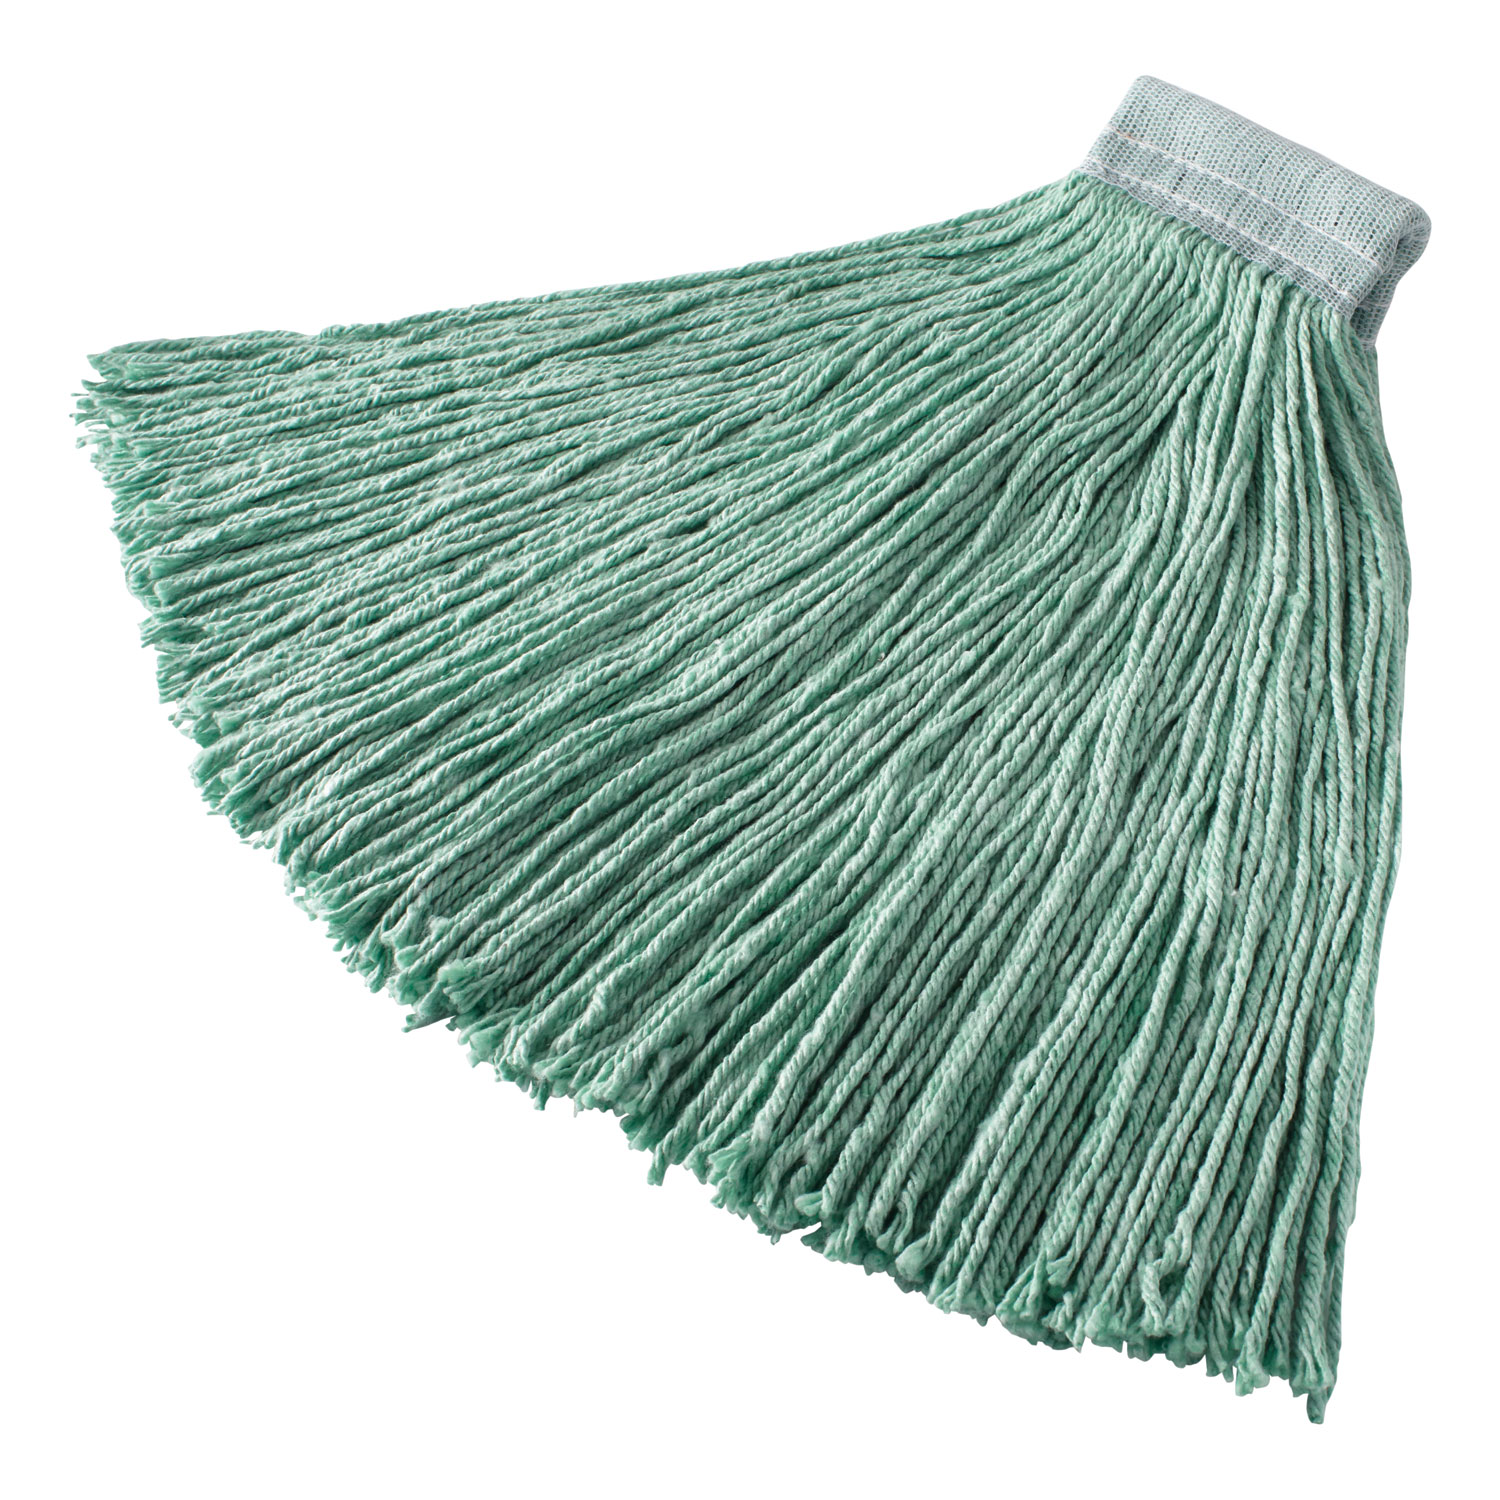  Rubbermaid Commercial FGF13700GR00 Non-Launderable Cotton/Synthetic Cut-End Wet Mop Heads, 24 oz, Green, 5 White Headband (RCPF13700GR00) 